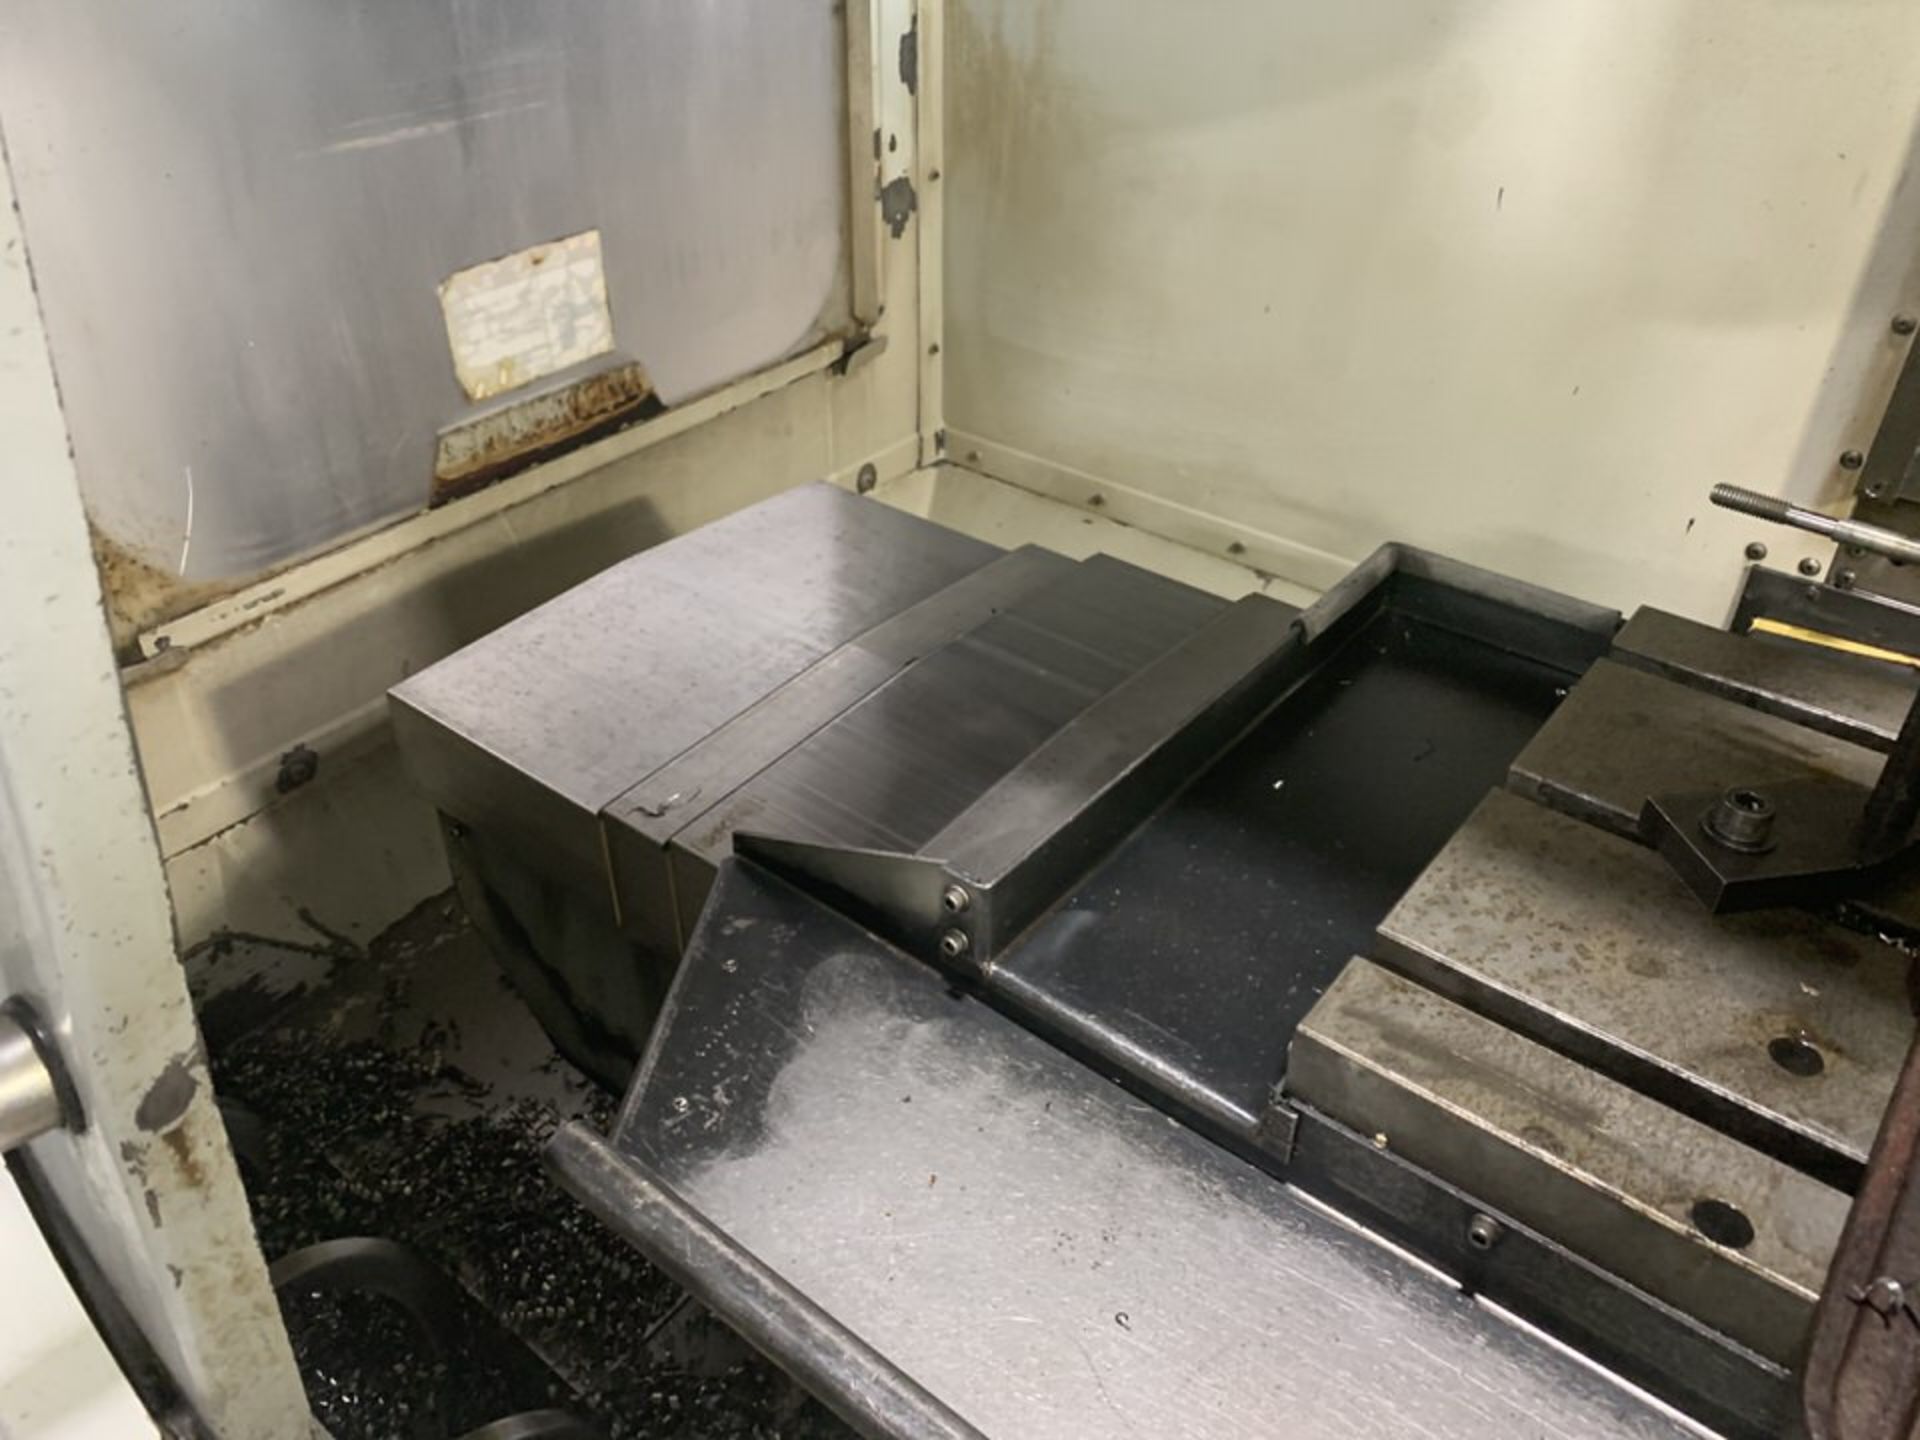 2006 Haas VF-1D CNC Vertical Machining Center - Image 5 of 8